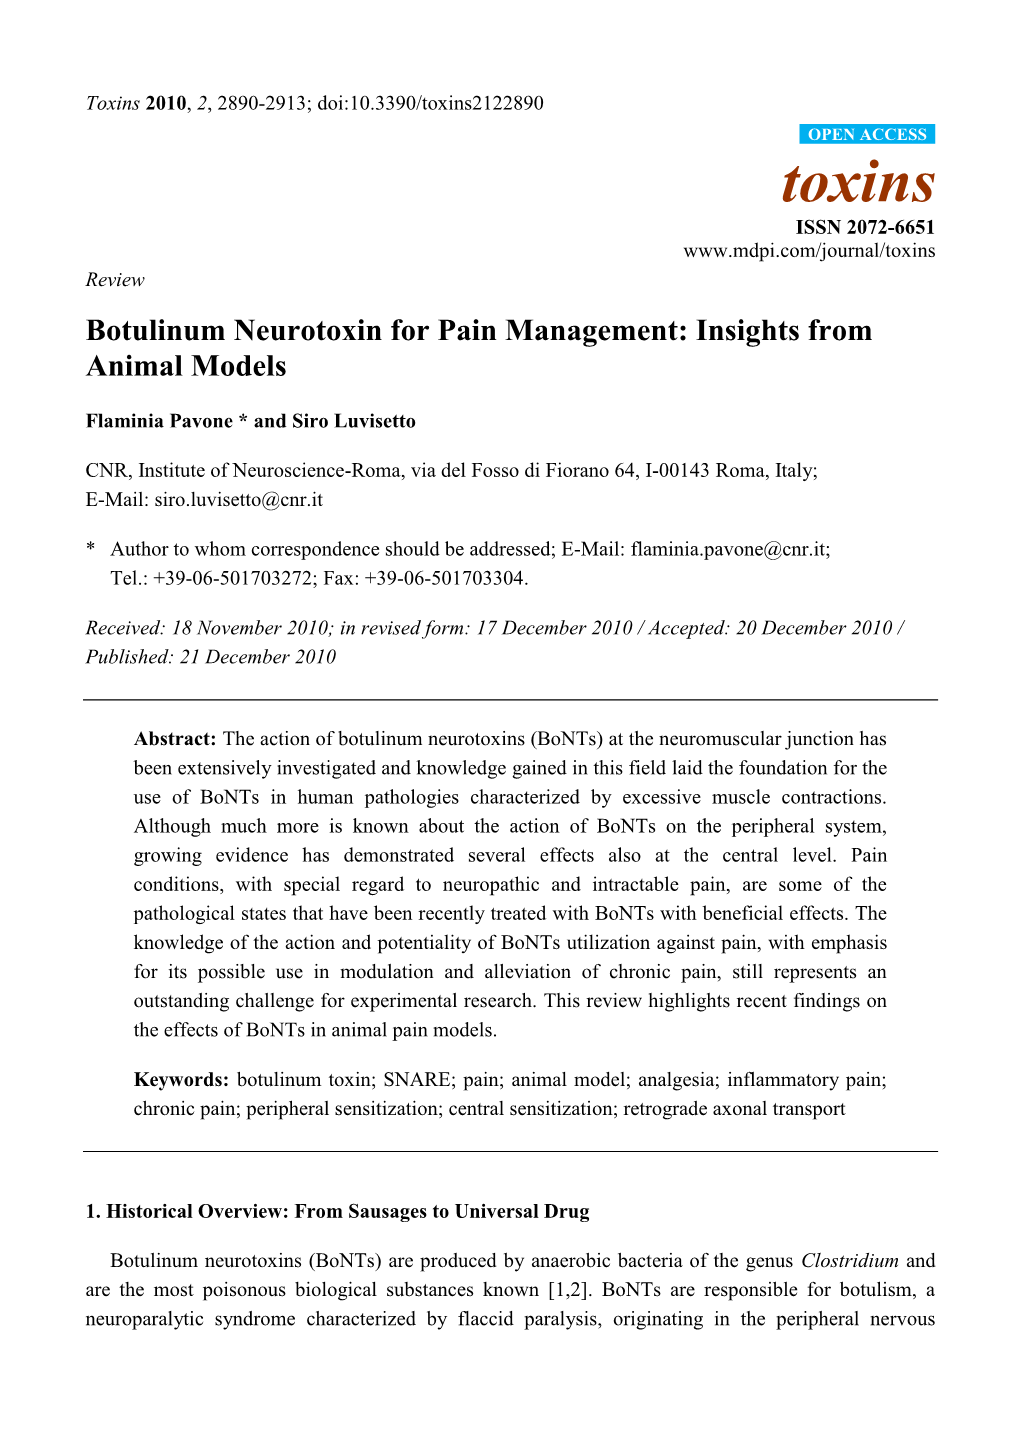 Botulinum Neurotoxin for Pain Management: Insights from Animal Models